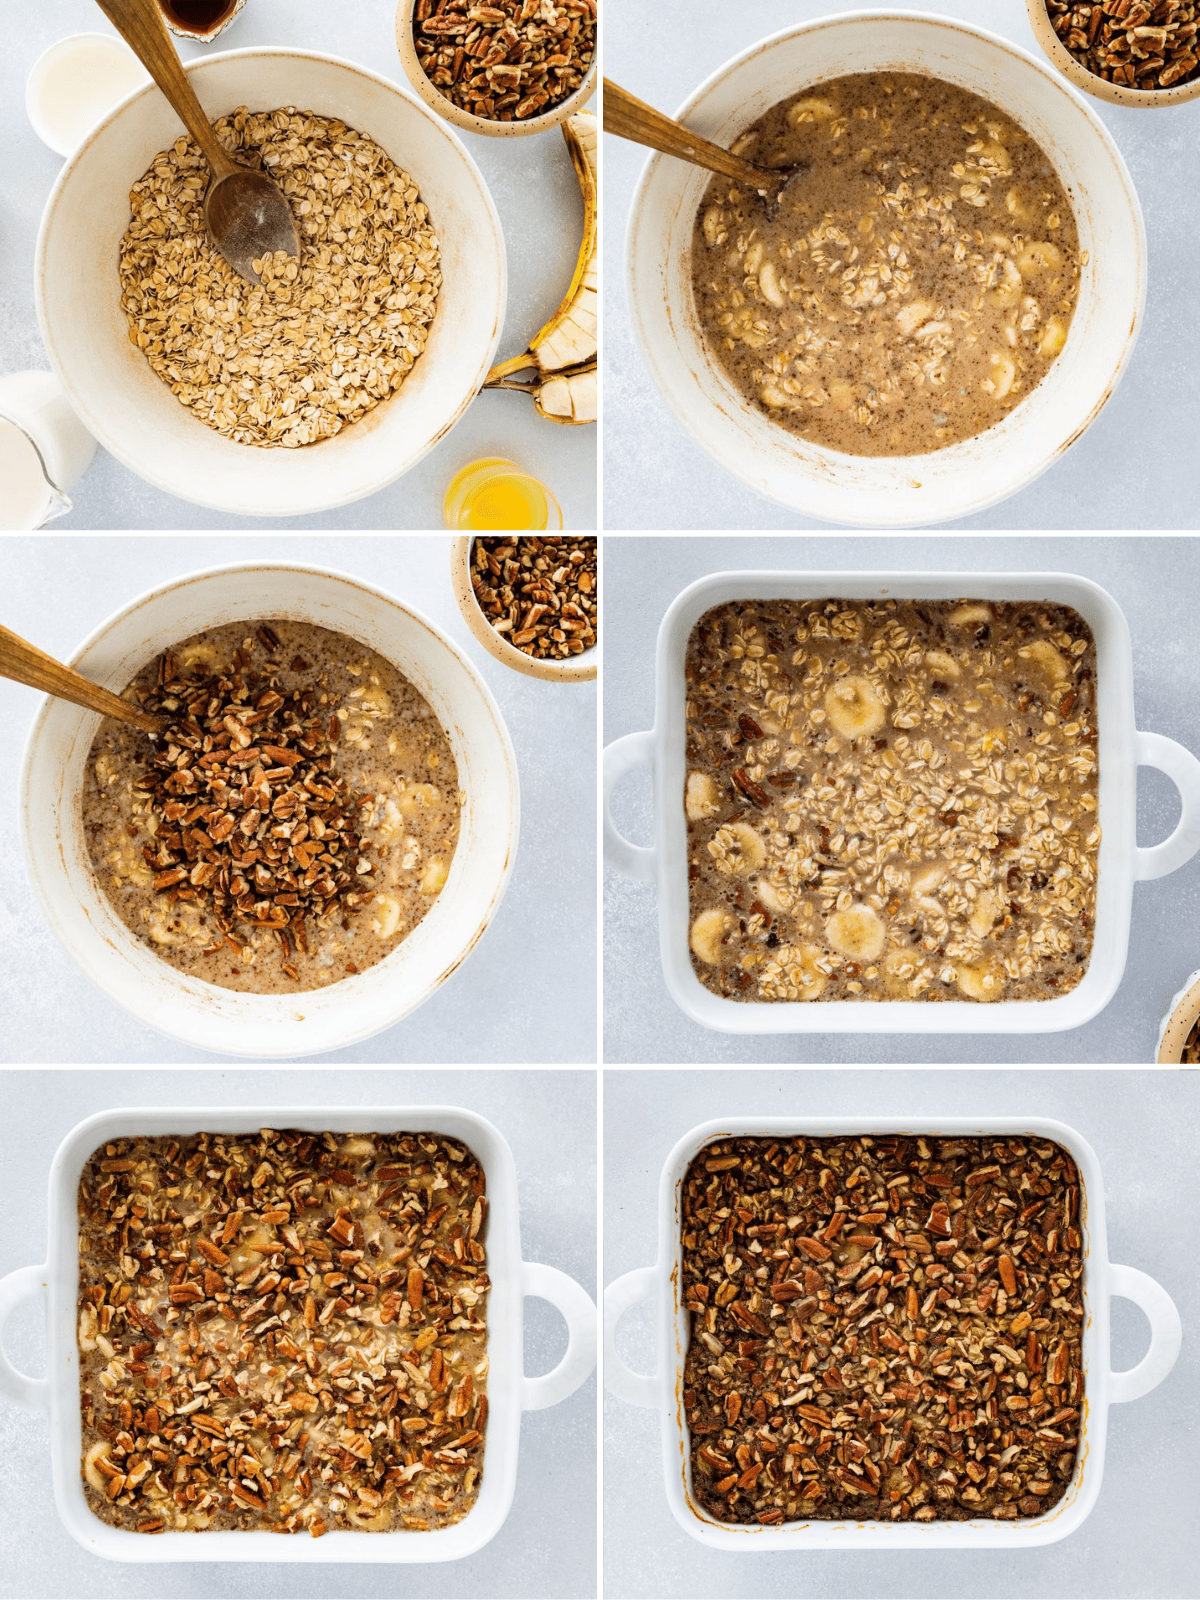 6 images showing how to make baked oatmeal.